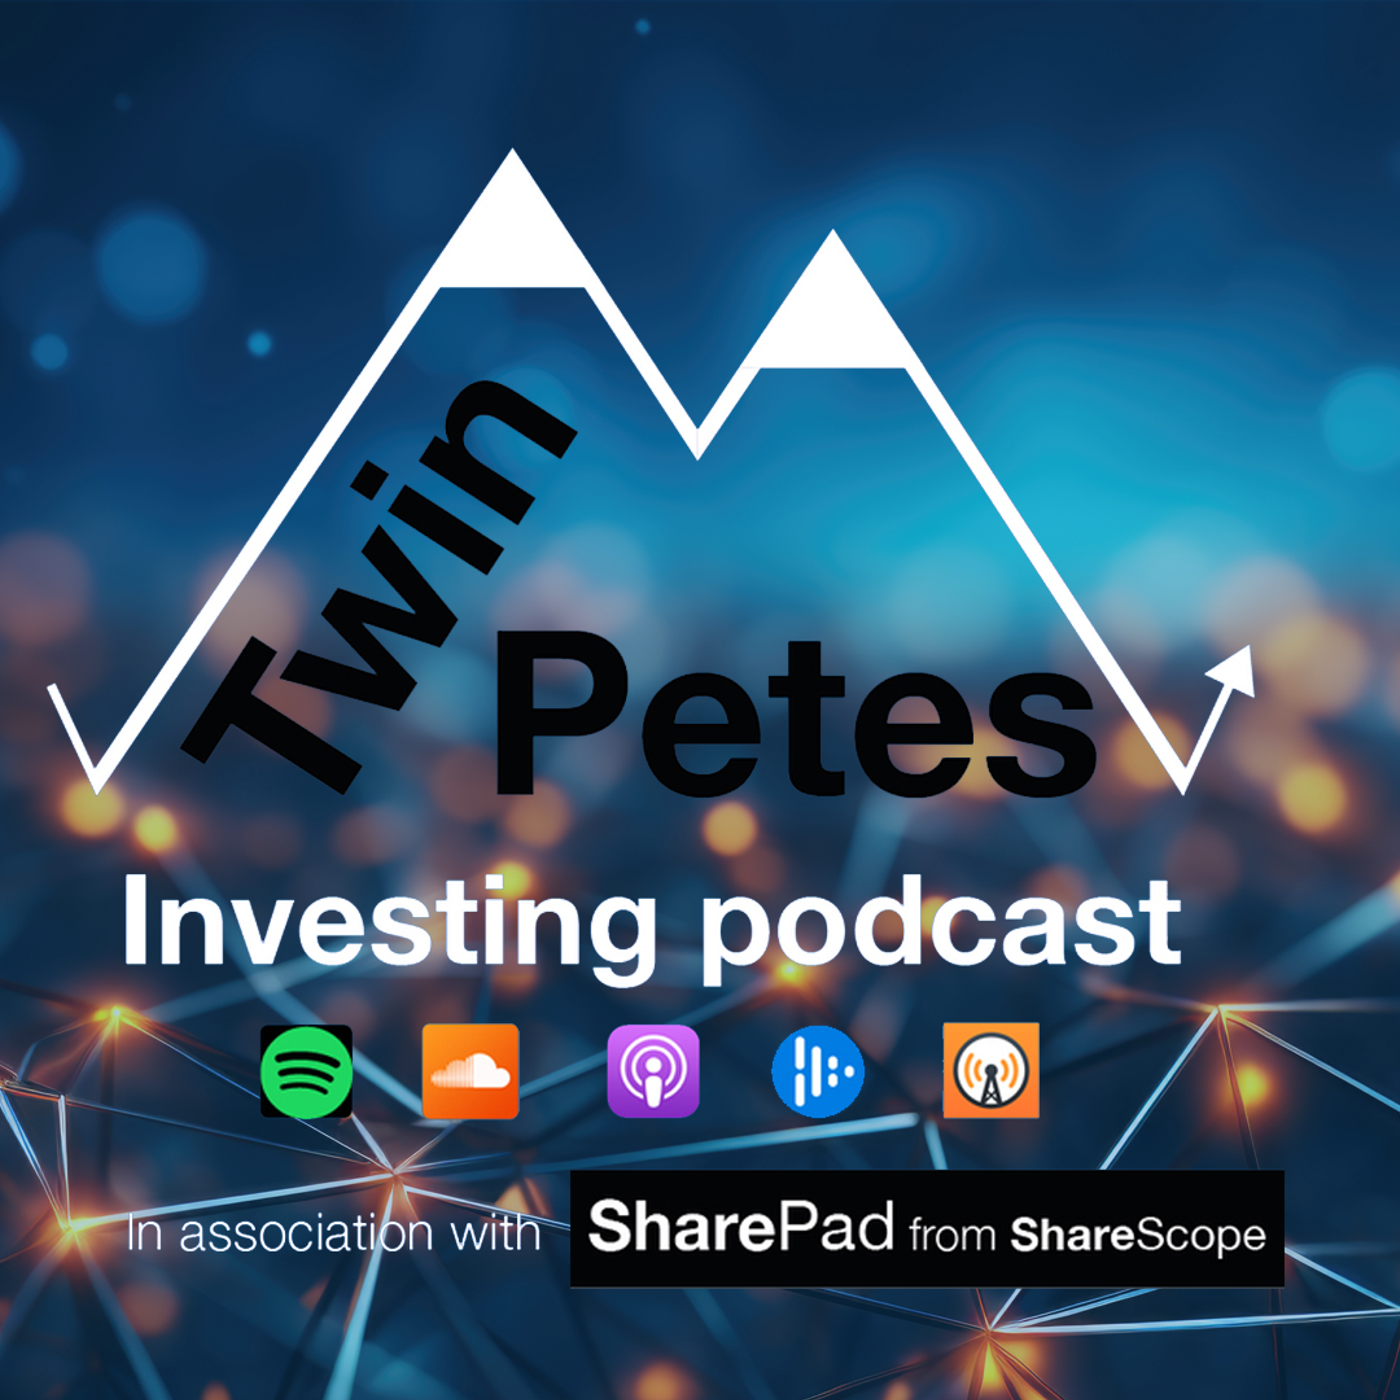 179: TWIN PETES INVESTING Podcast no.126: After a 1411% return should you consider this UK investment? Ebay, Drax, Bodycote, 3i, Verisign, Tesla, IDHC, Anglo American, Bonds, Darktrace, HL. TIG DGI9 A